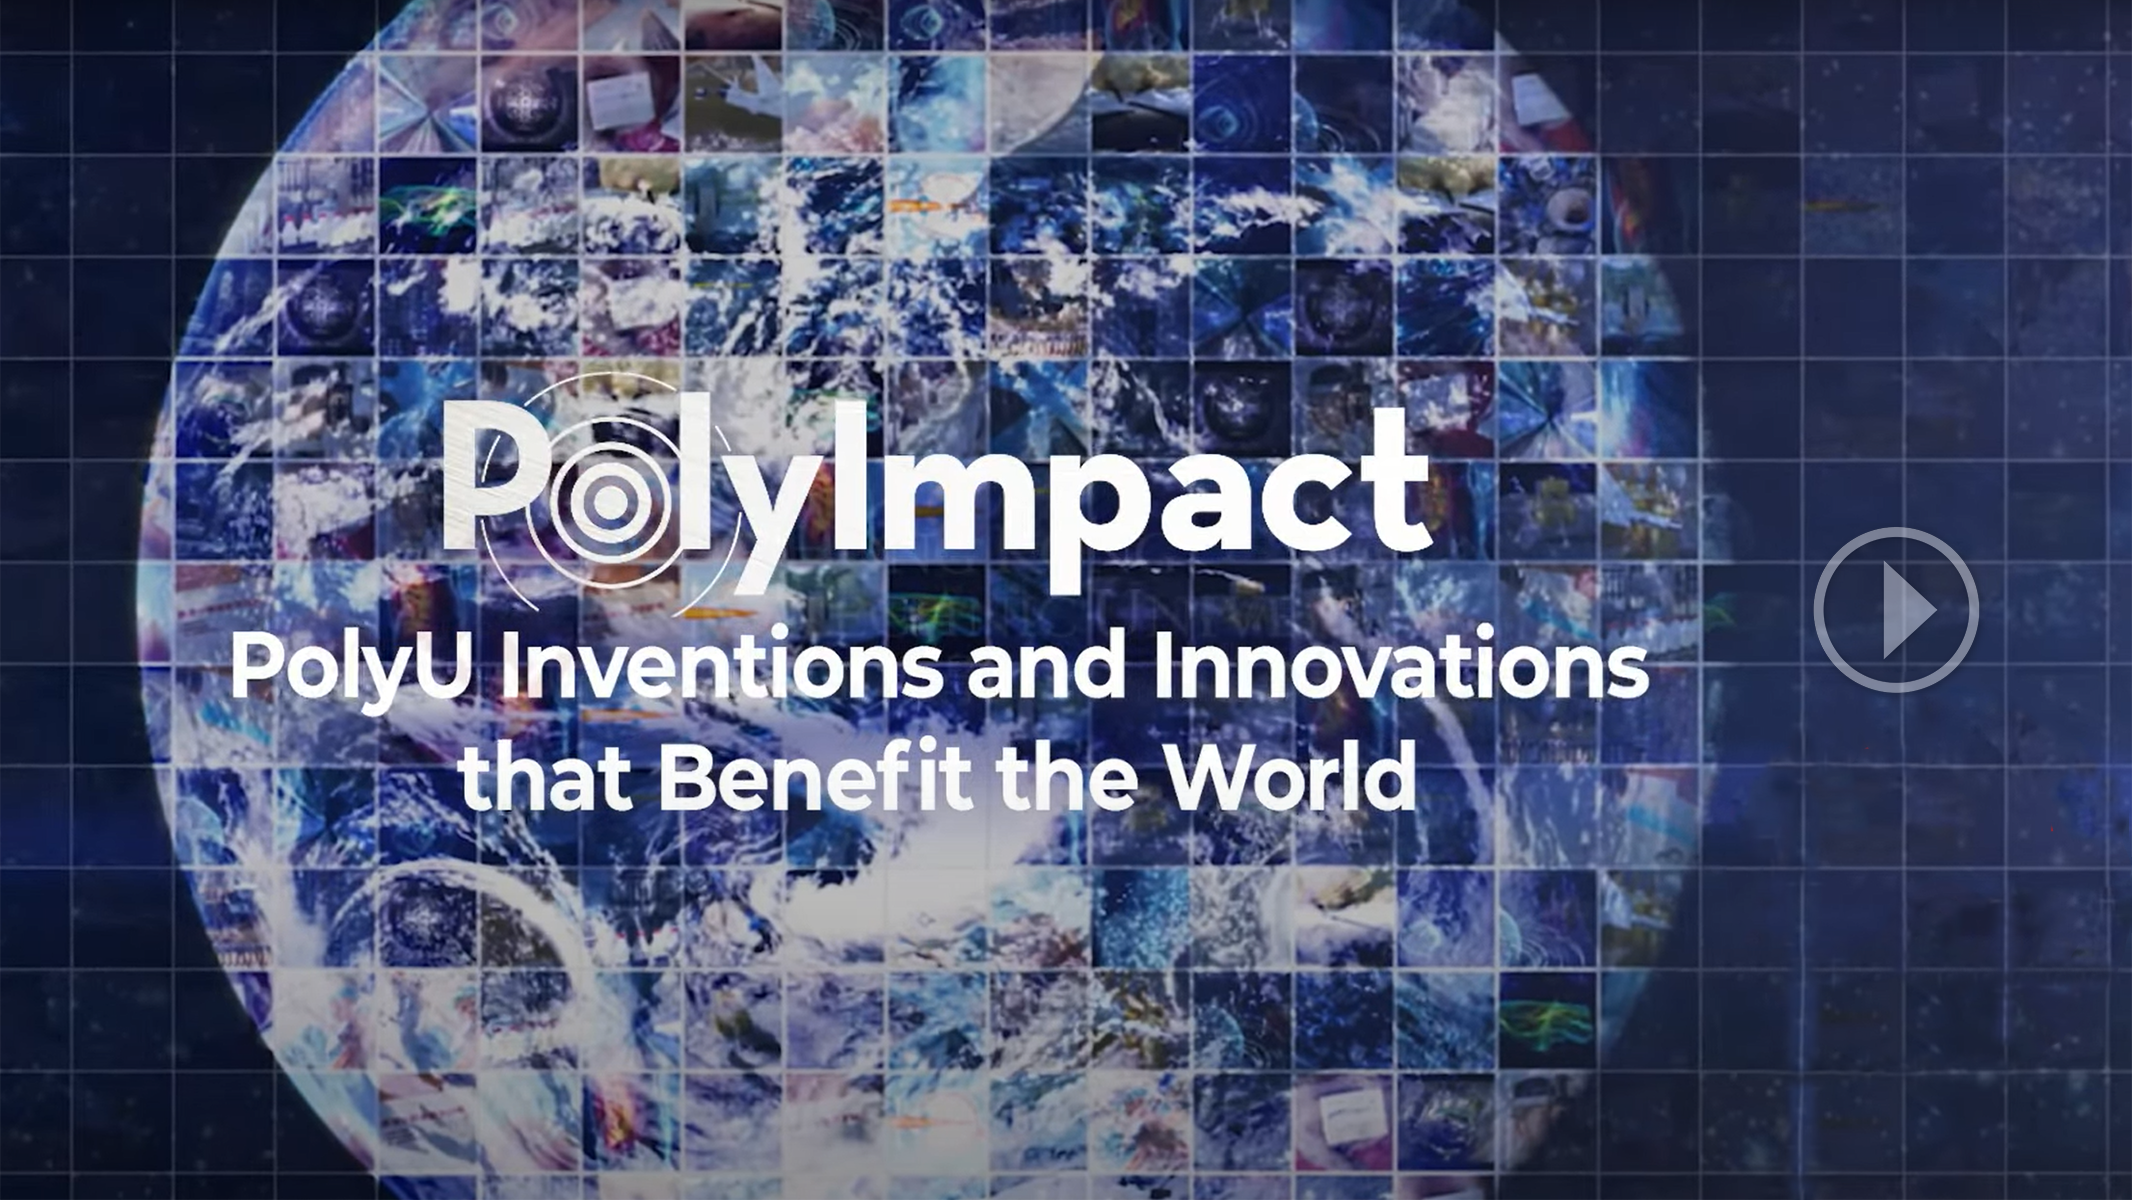 PolyImpact: PolyU Inventions and Innovations that Benefit the World